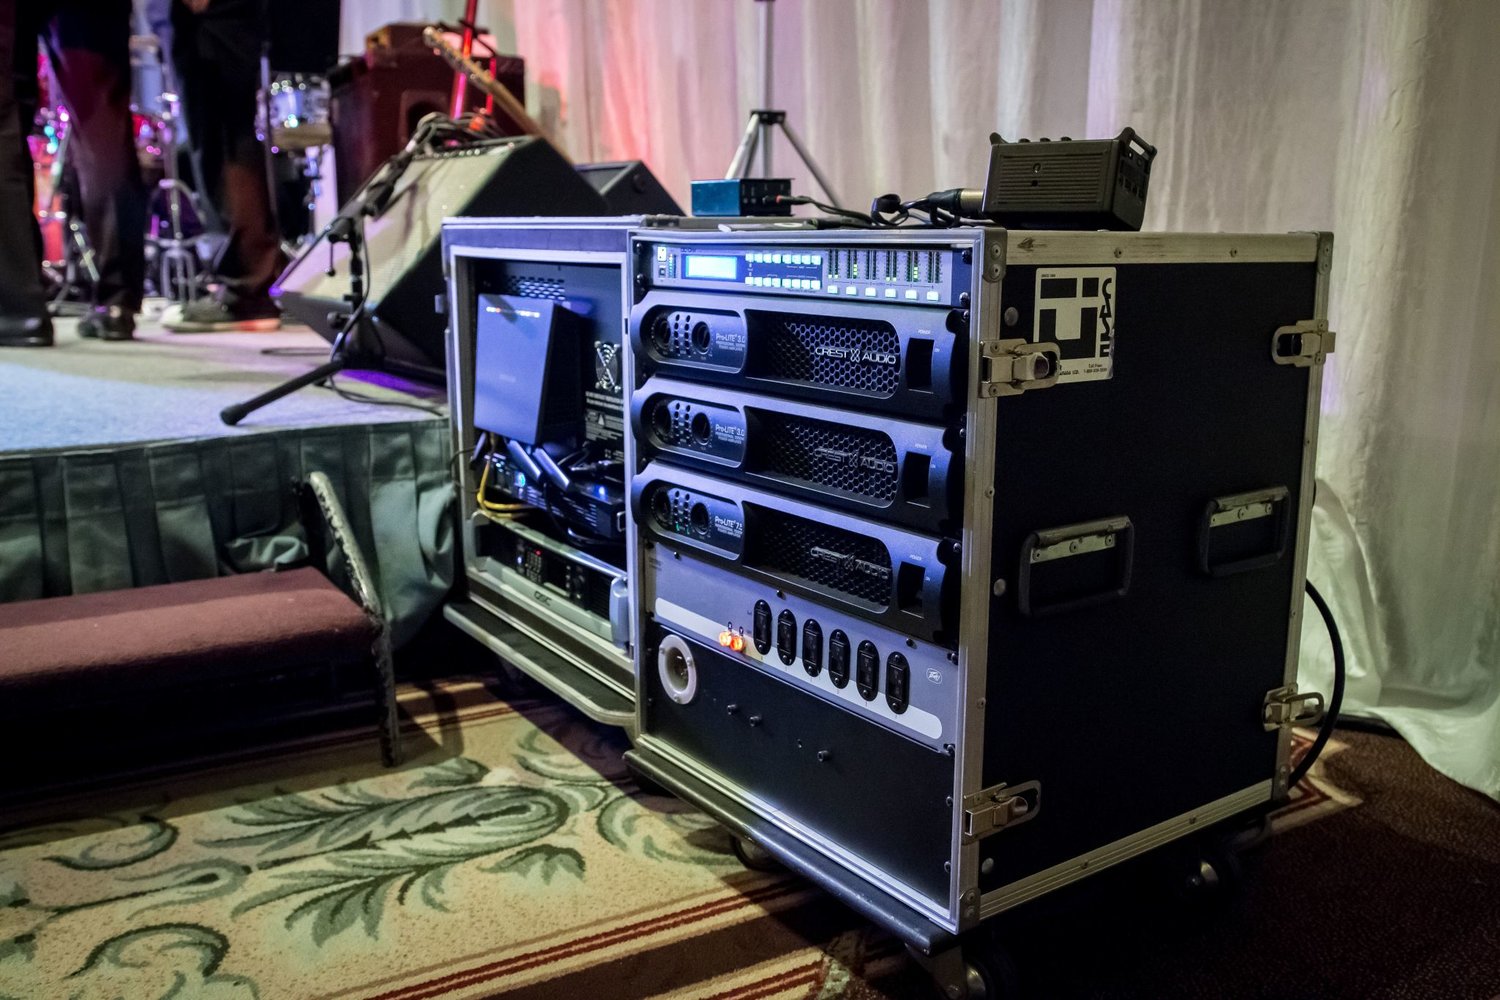 Compact Amp Rack and Power Distribution at Crystal Ballroom, Fairmont Empress Victoria 2017